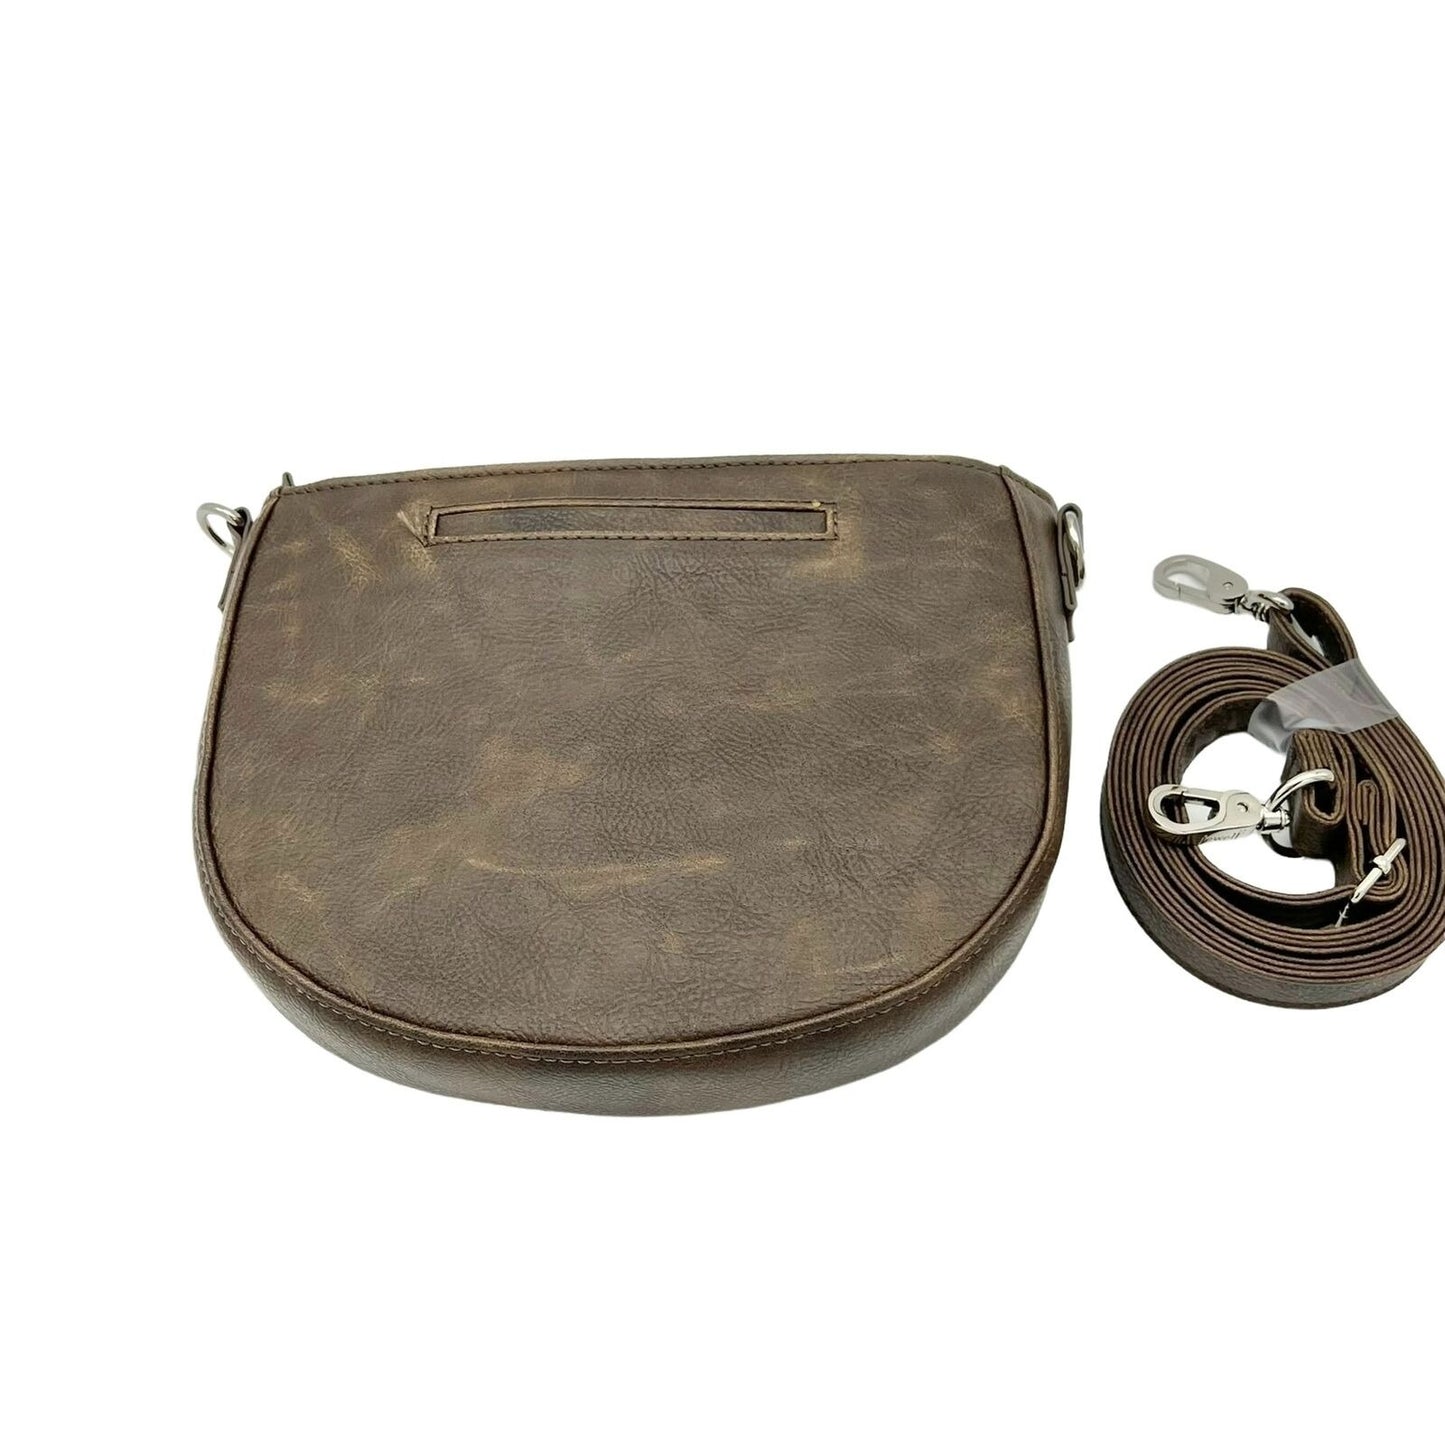 Thirty-One Gifts - Our Chestnut Distressed Pebble Inspired